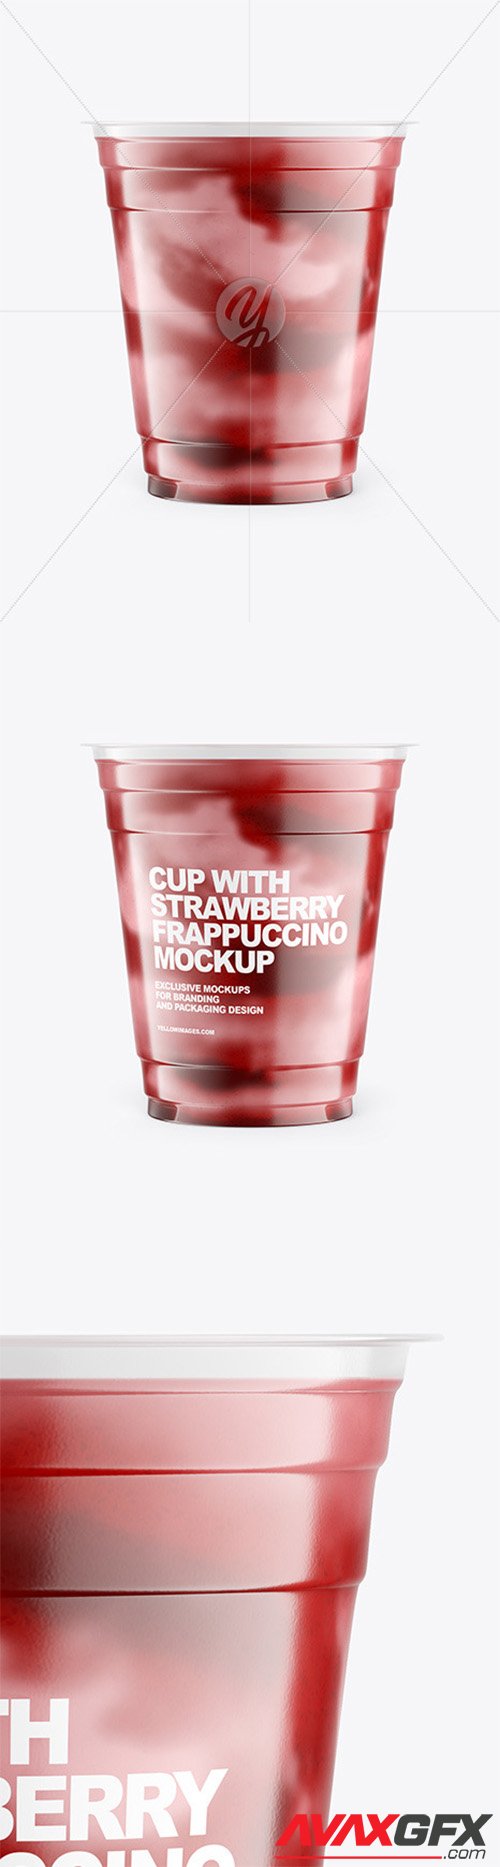 Cup With Strawberry Frappuccino Mockup 68090